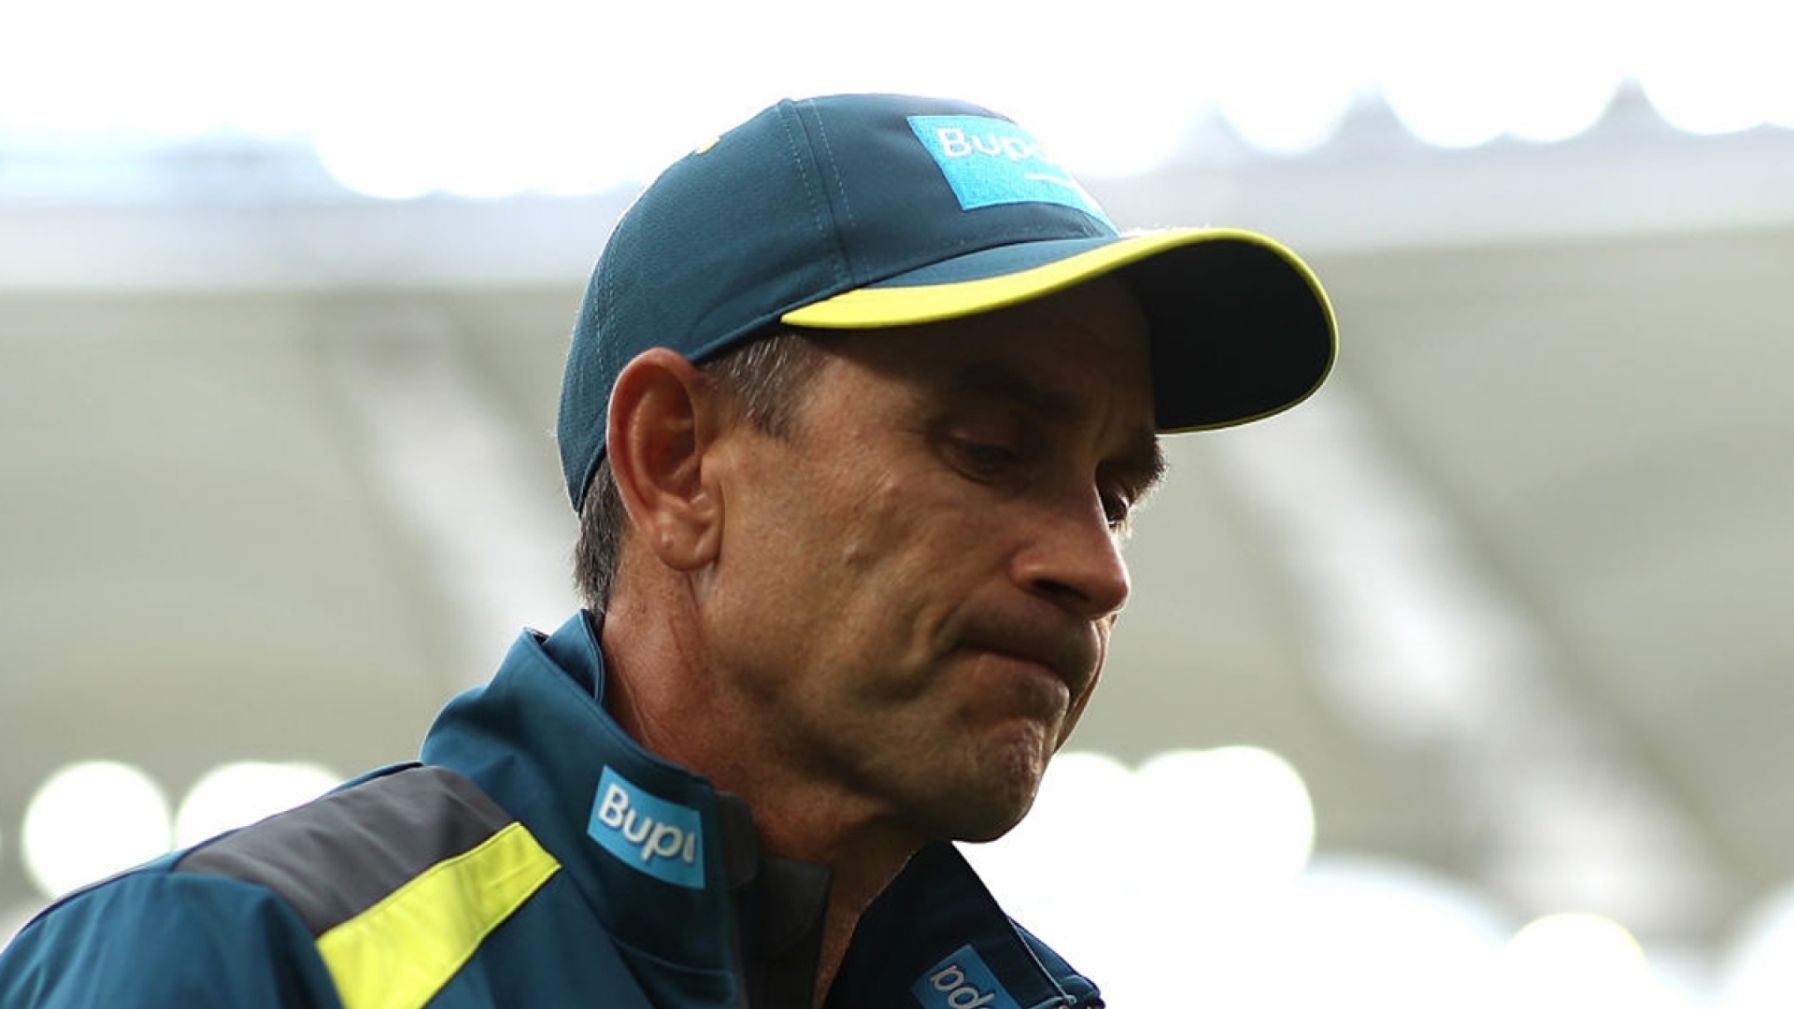 Things we can control, we have to control: Justin Langer laments slow over rate costing Australia WTC Final spot